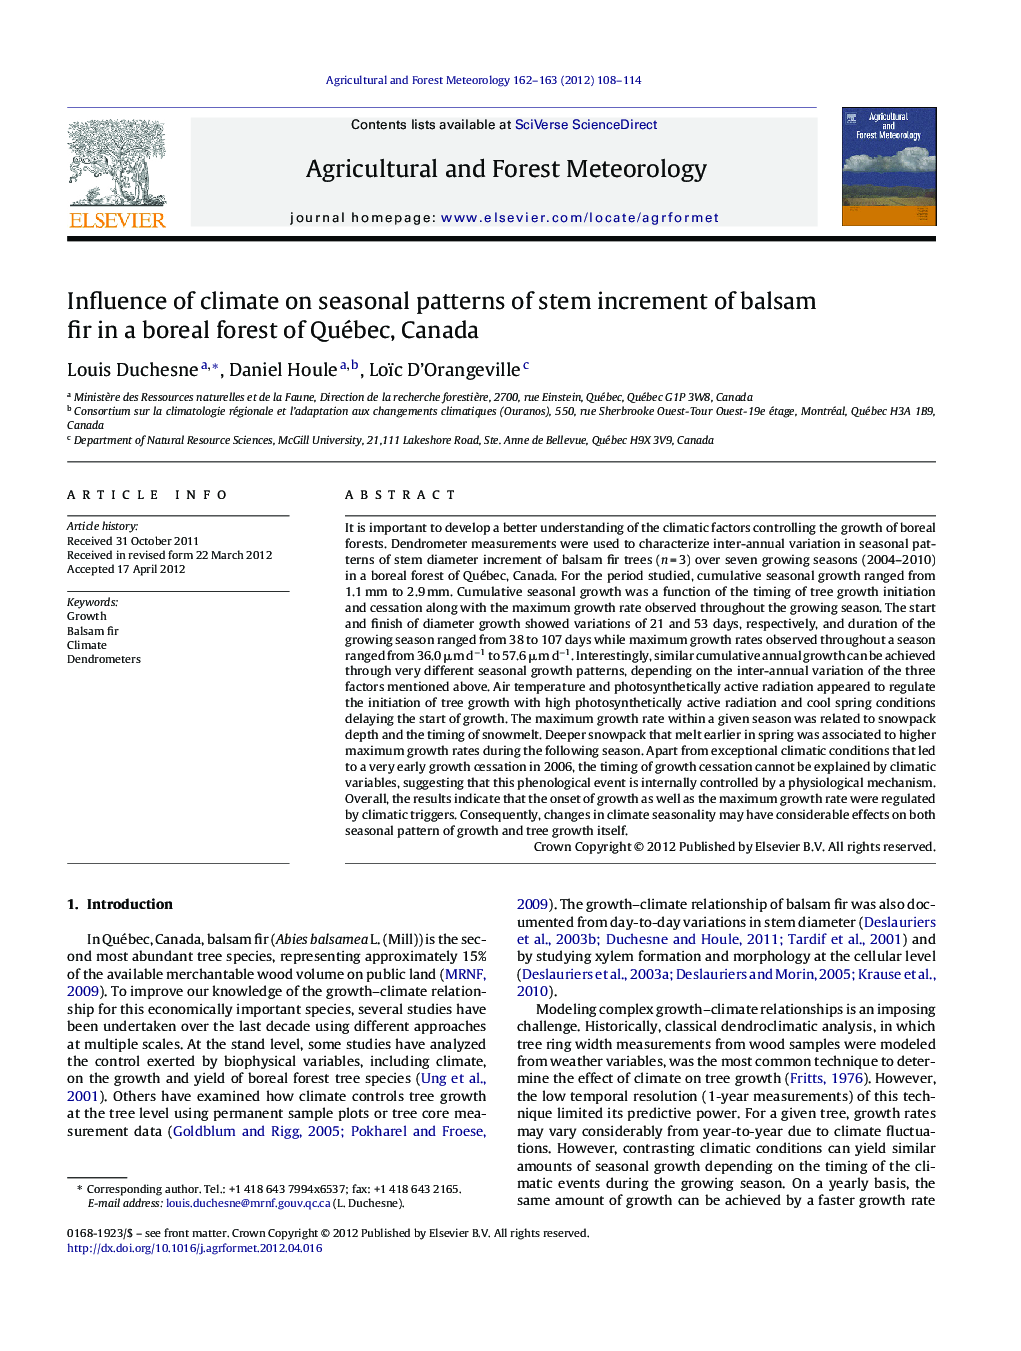 Influence of climate on seasonal patterns of stem increment of balsam fir in a boreal forest of Québec, Canada